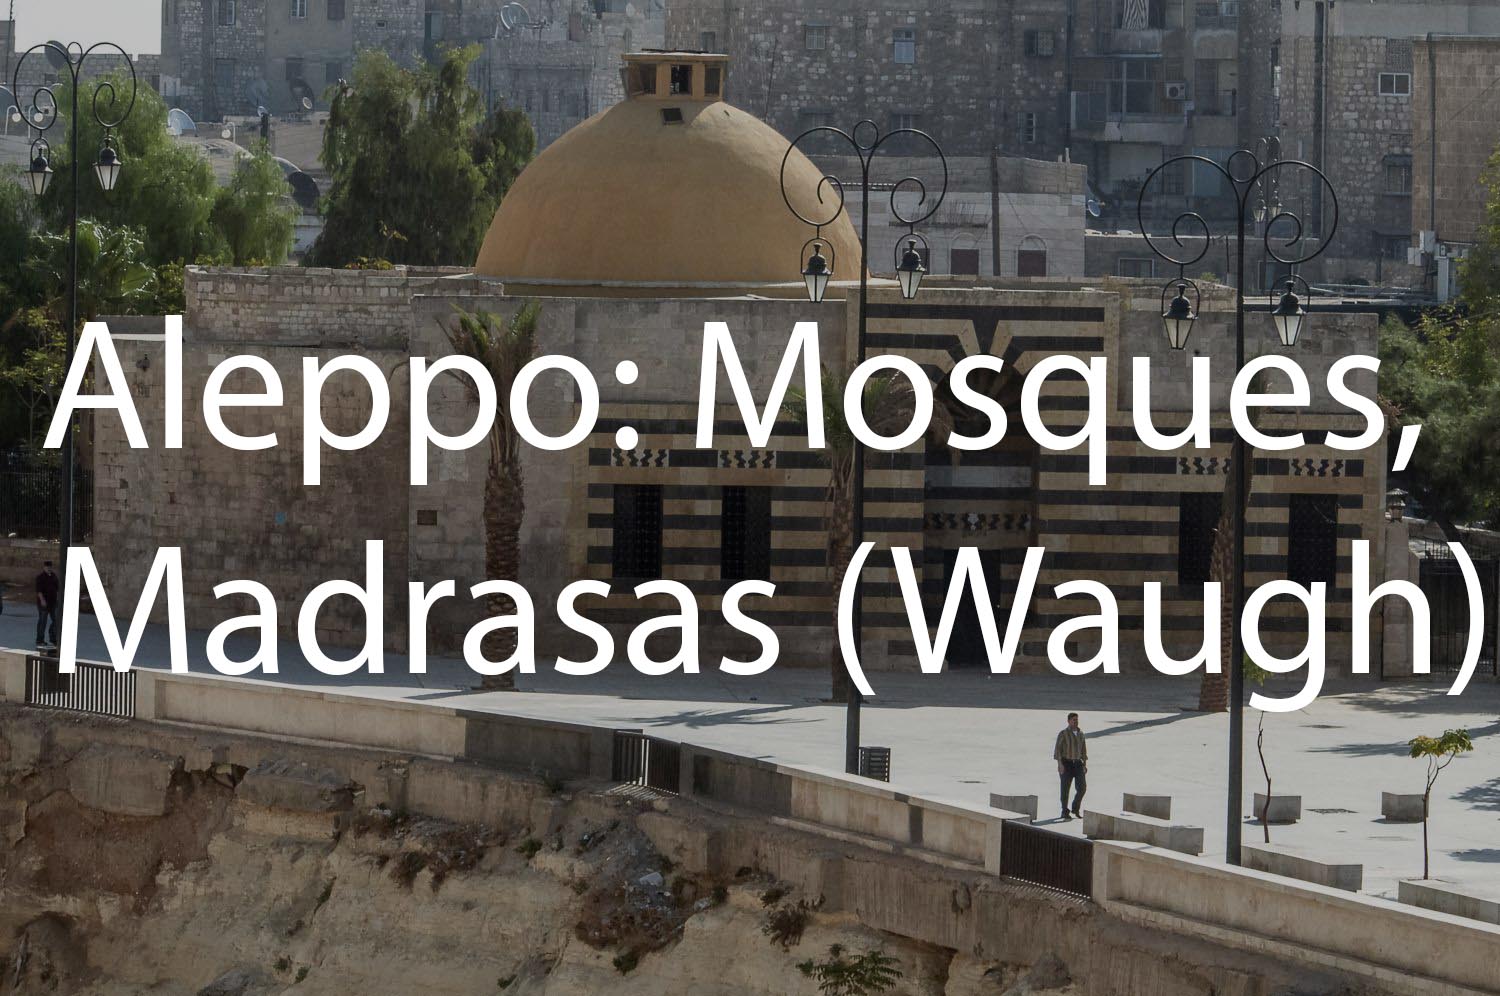 Aleppo: Mosques and Madrasas (Waugh Collection)